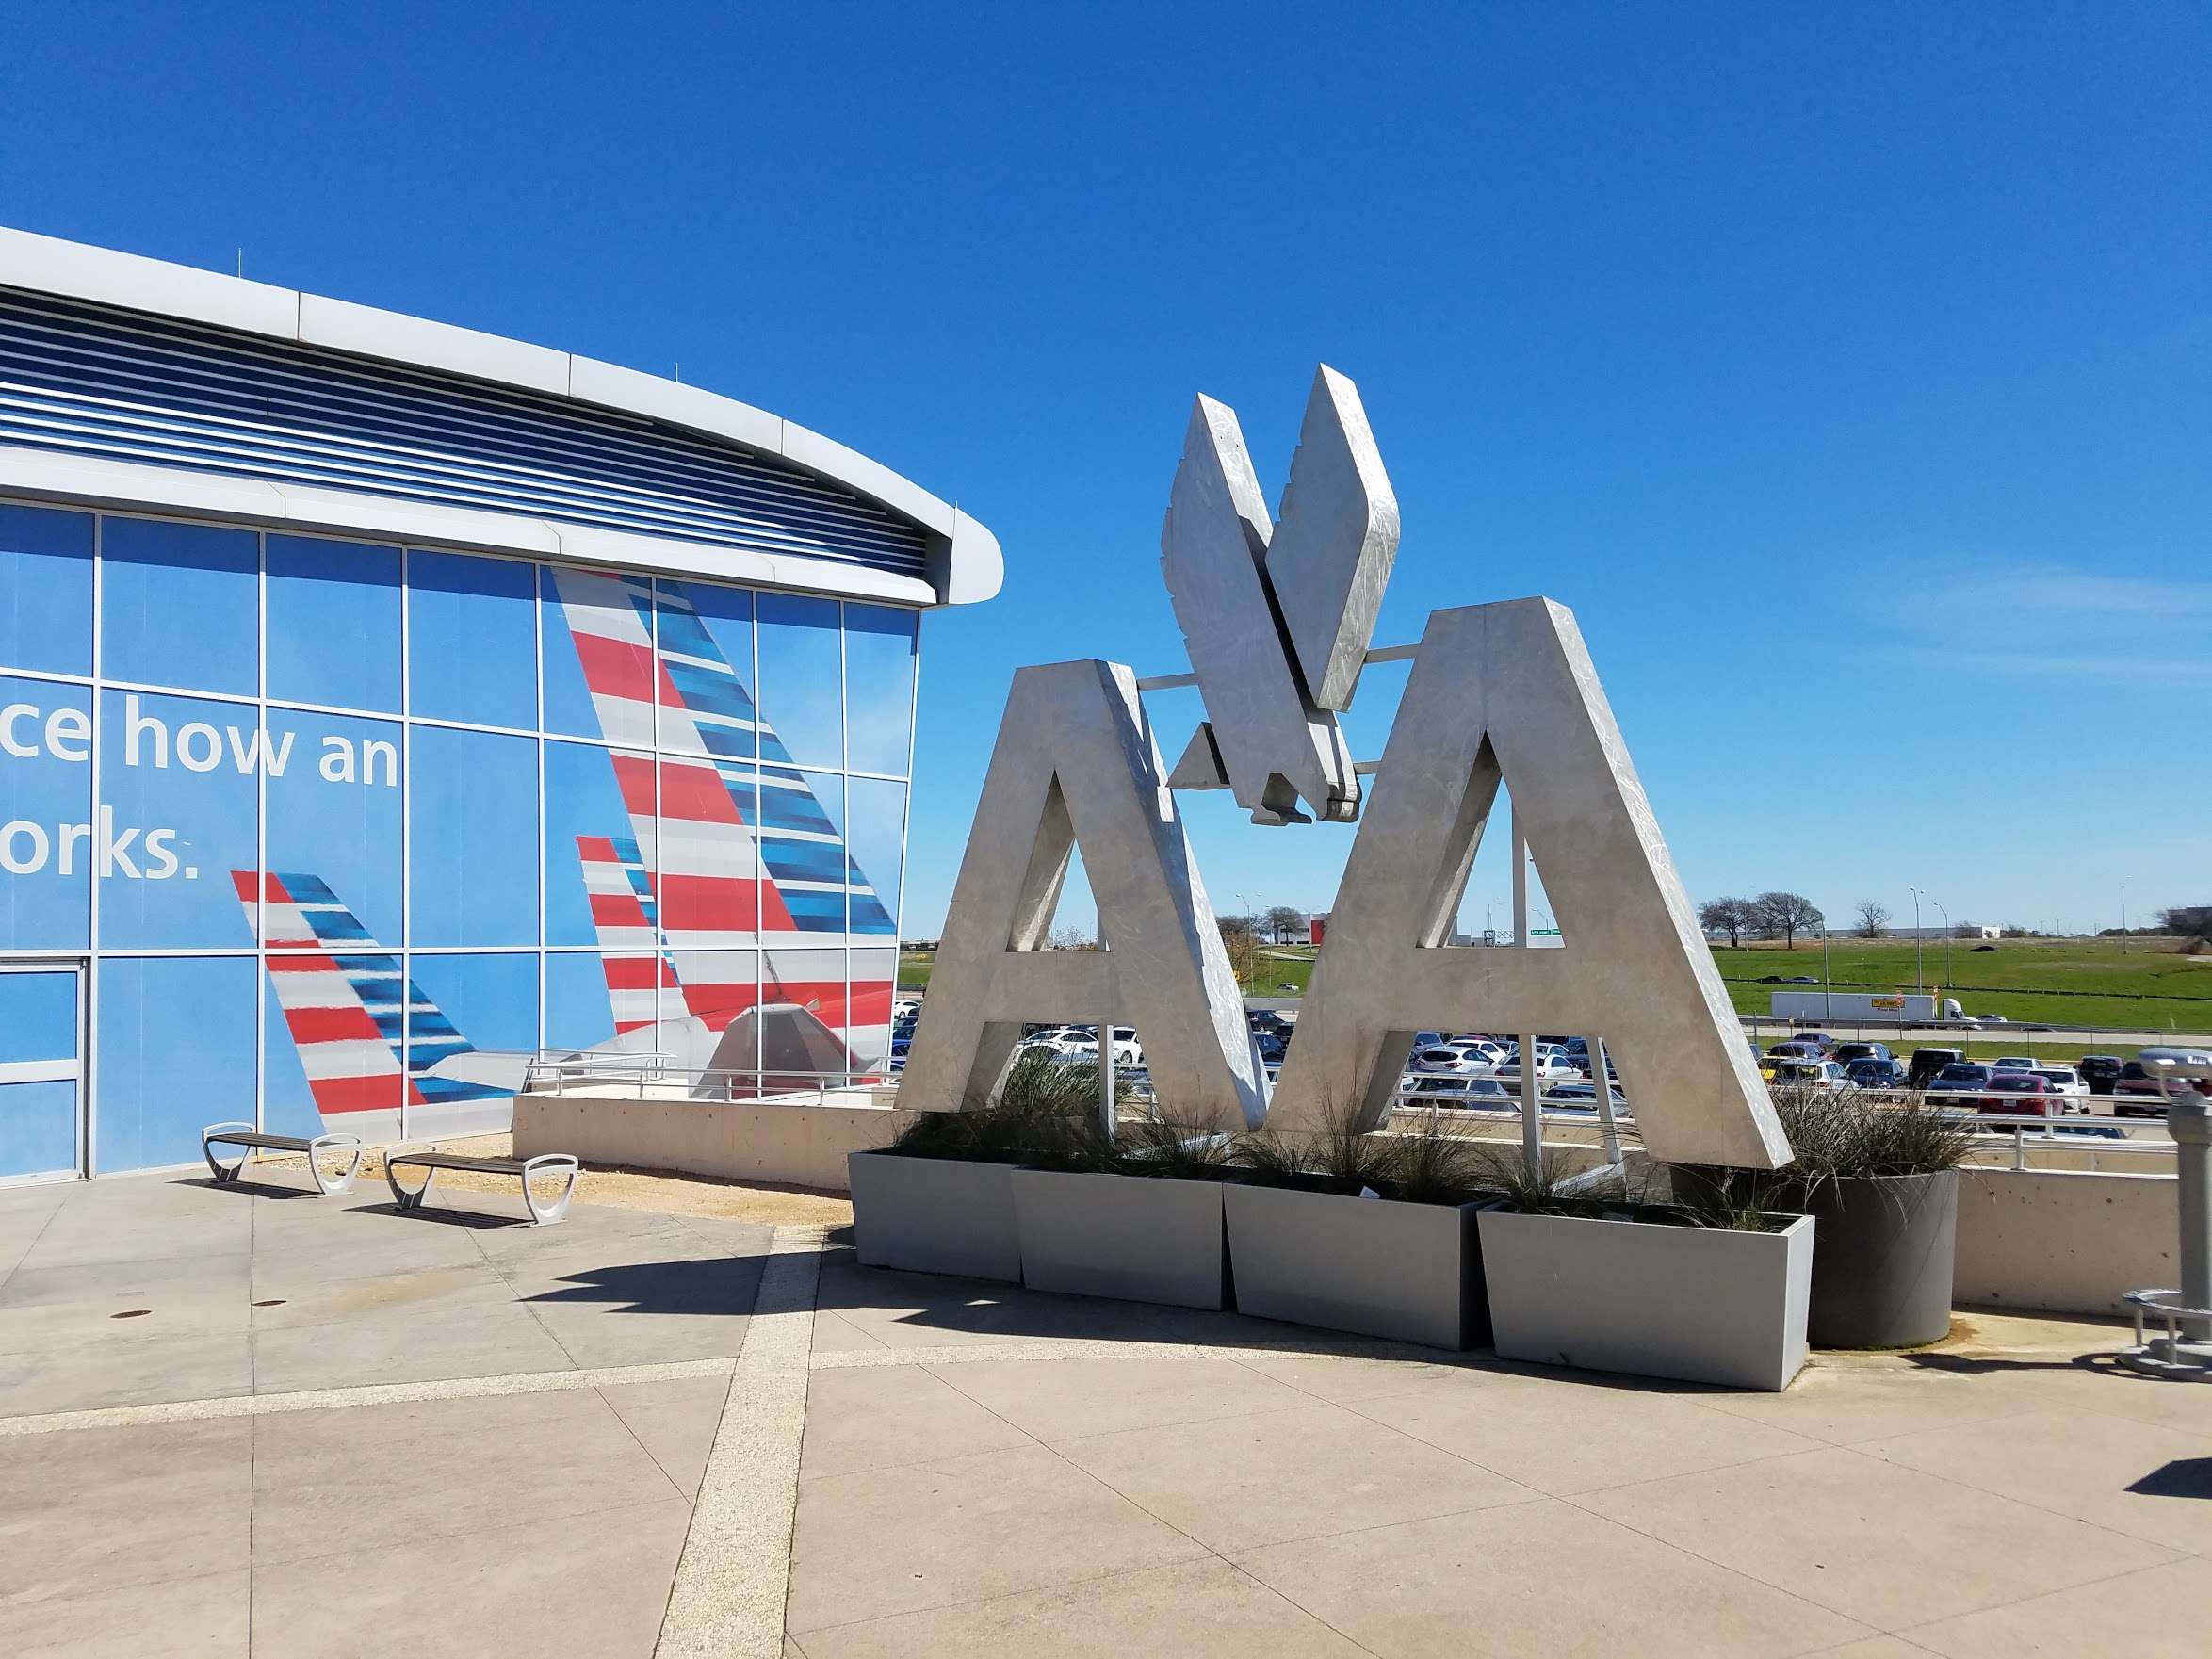 American Airlines Loyalty Points Are The New Way Elite Status Is Earned